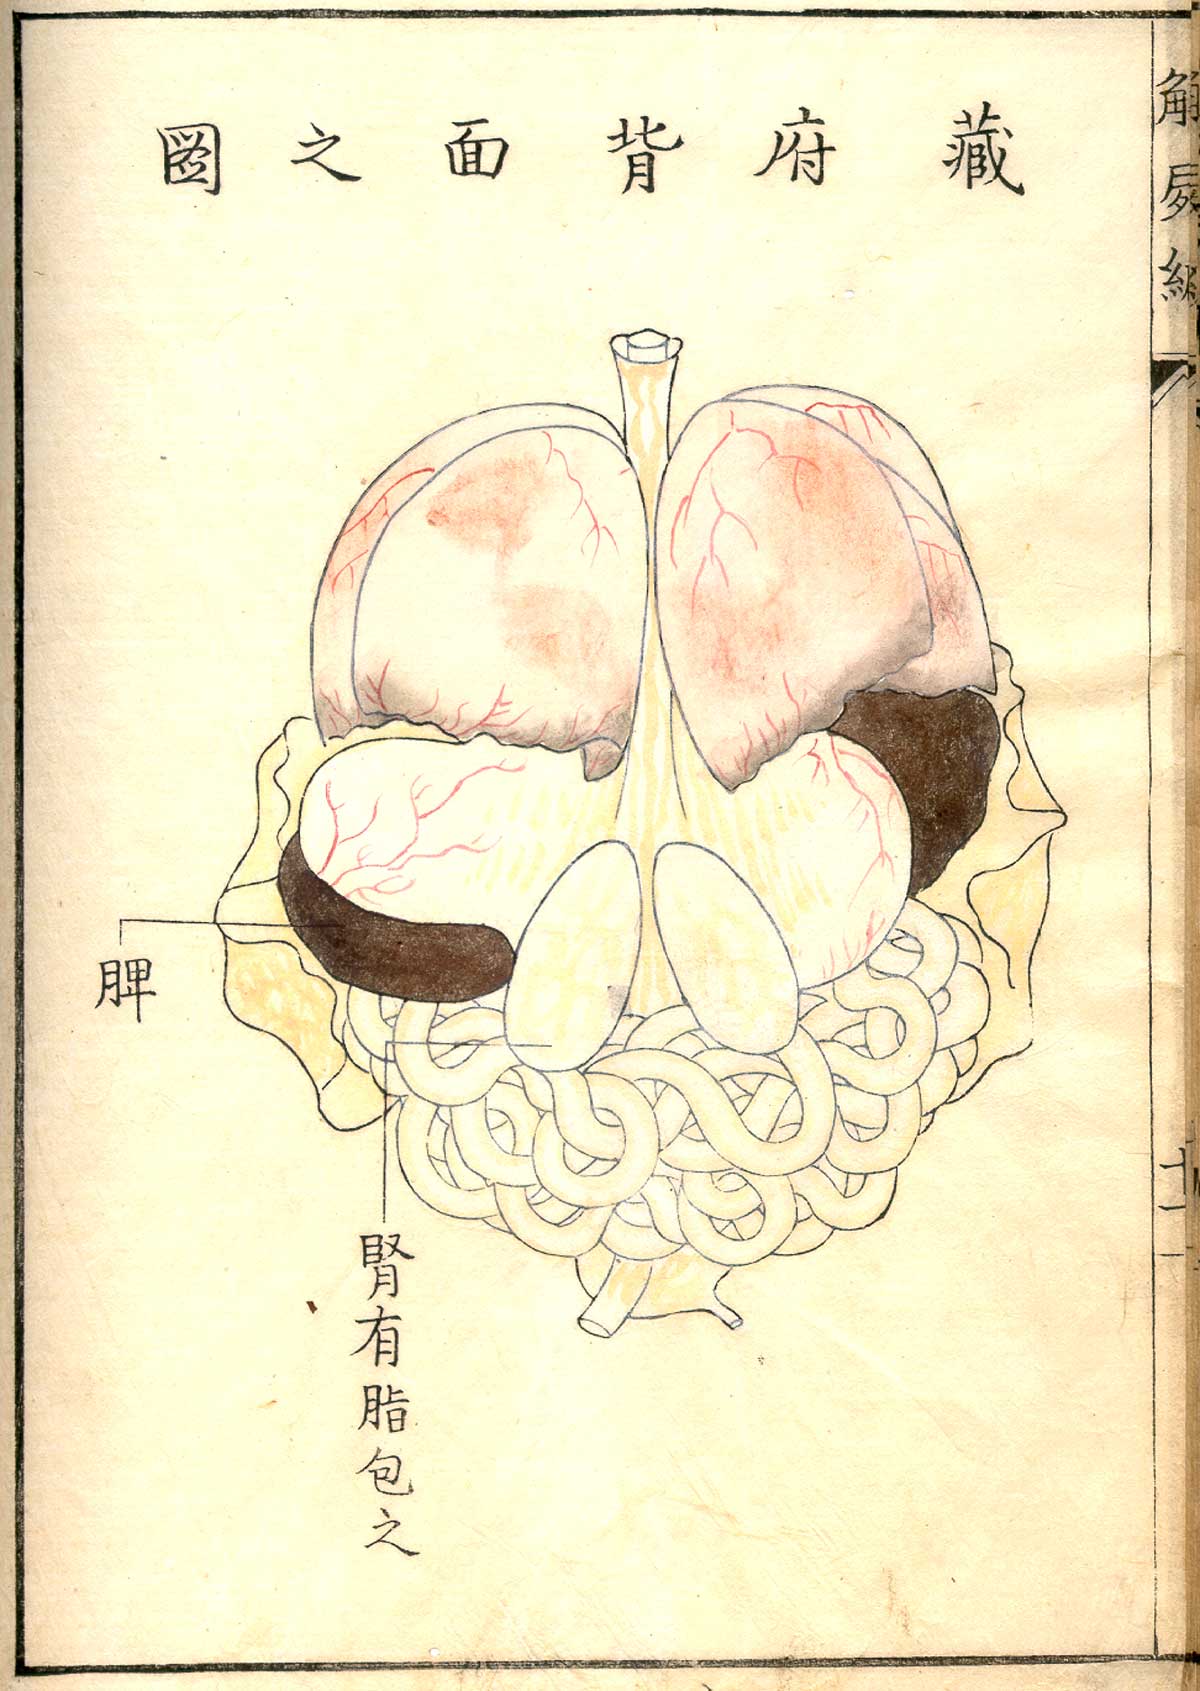 Hand colored woodcut of the internal organs viewed from the rear with lungs and heart at top, stomach and liver in the middle and intestines and bladder at the bottom with Japanese text describing some of the structures, from Shinnin Kawaguchi's Kaishi hen, NLM Call no.: WZ 260 K21k 1772.